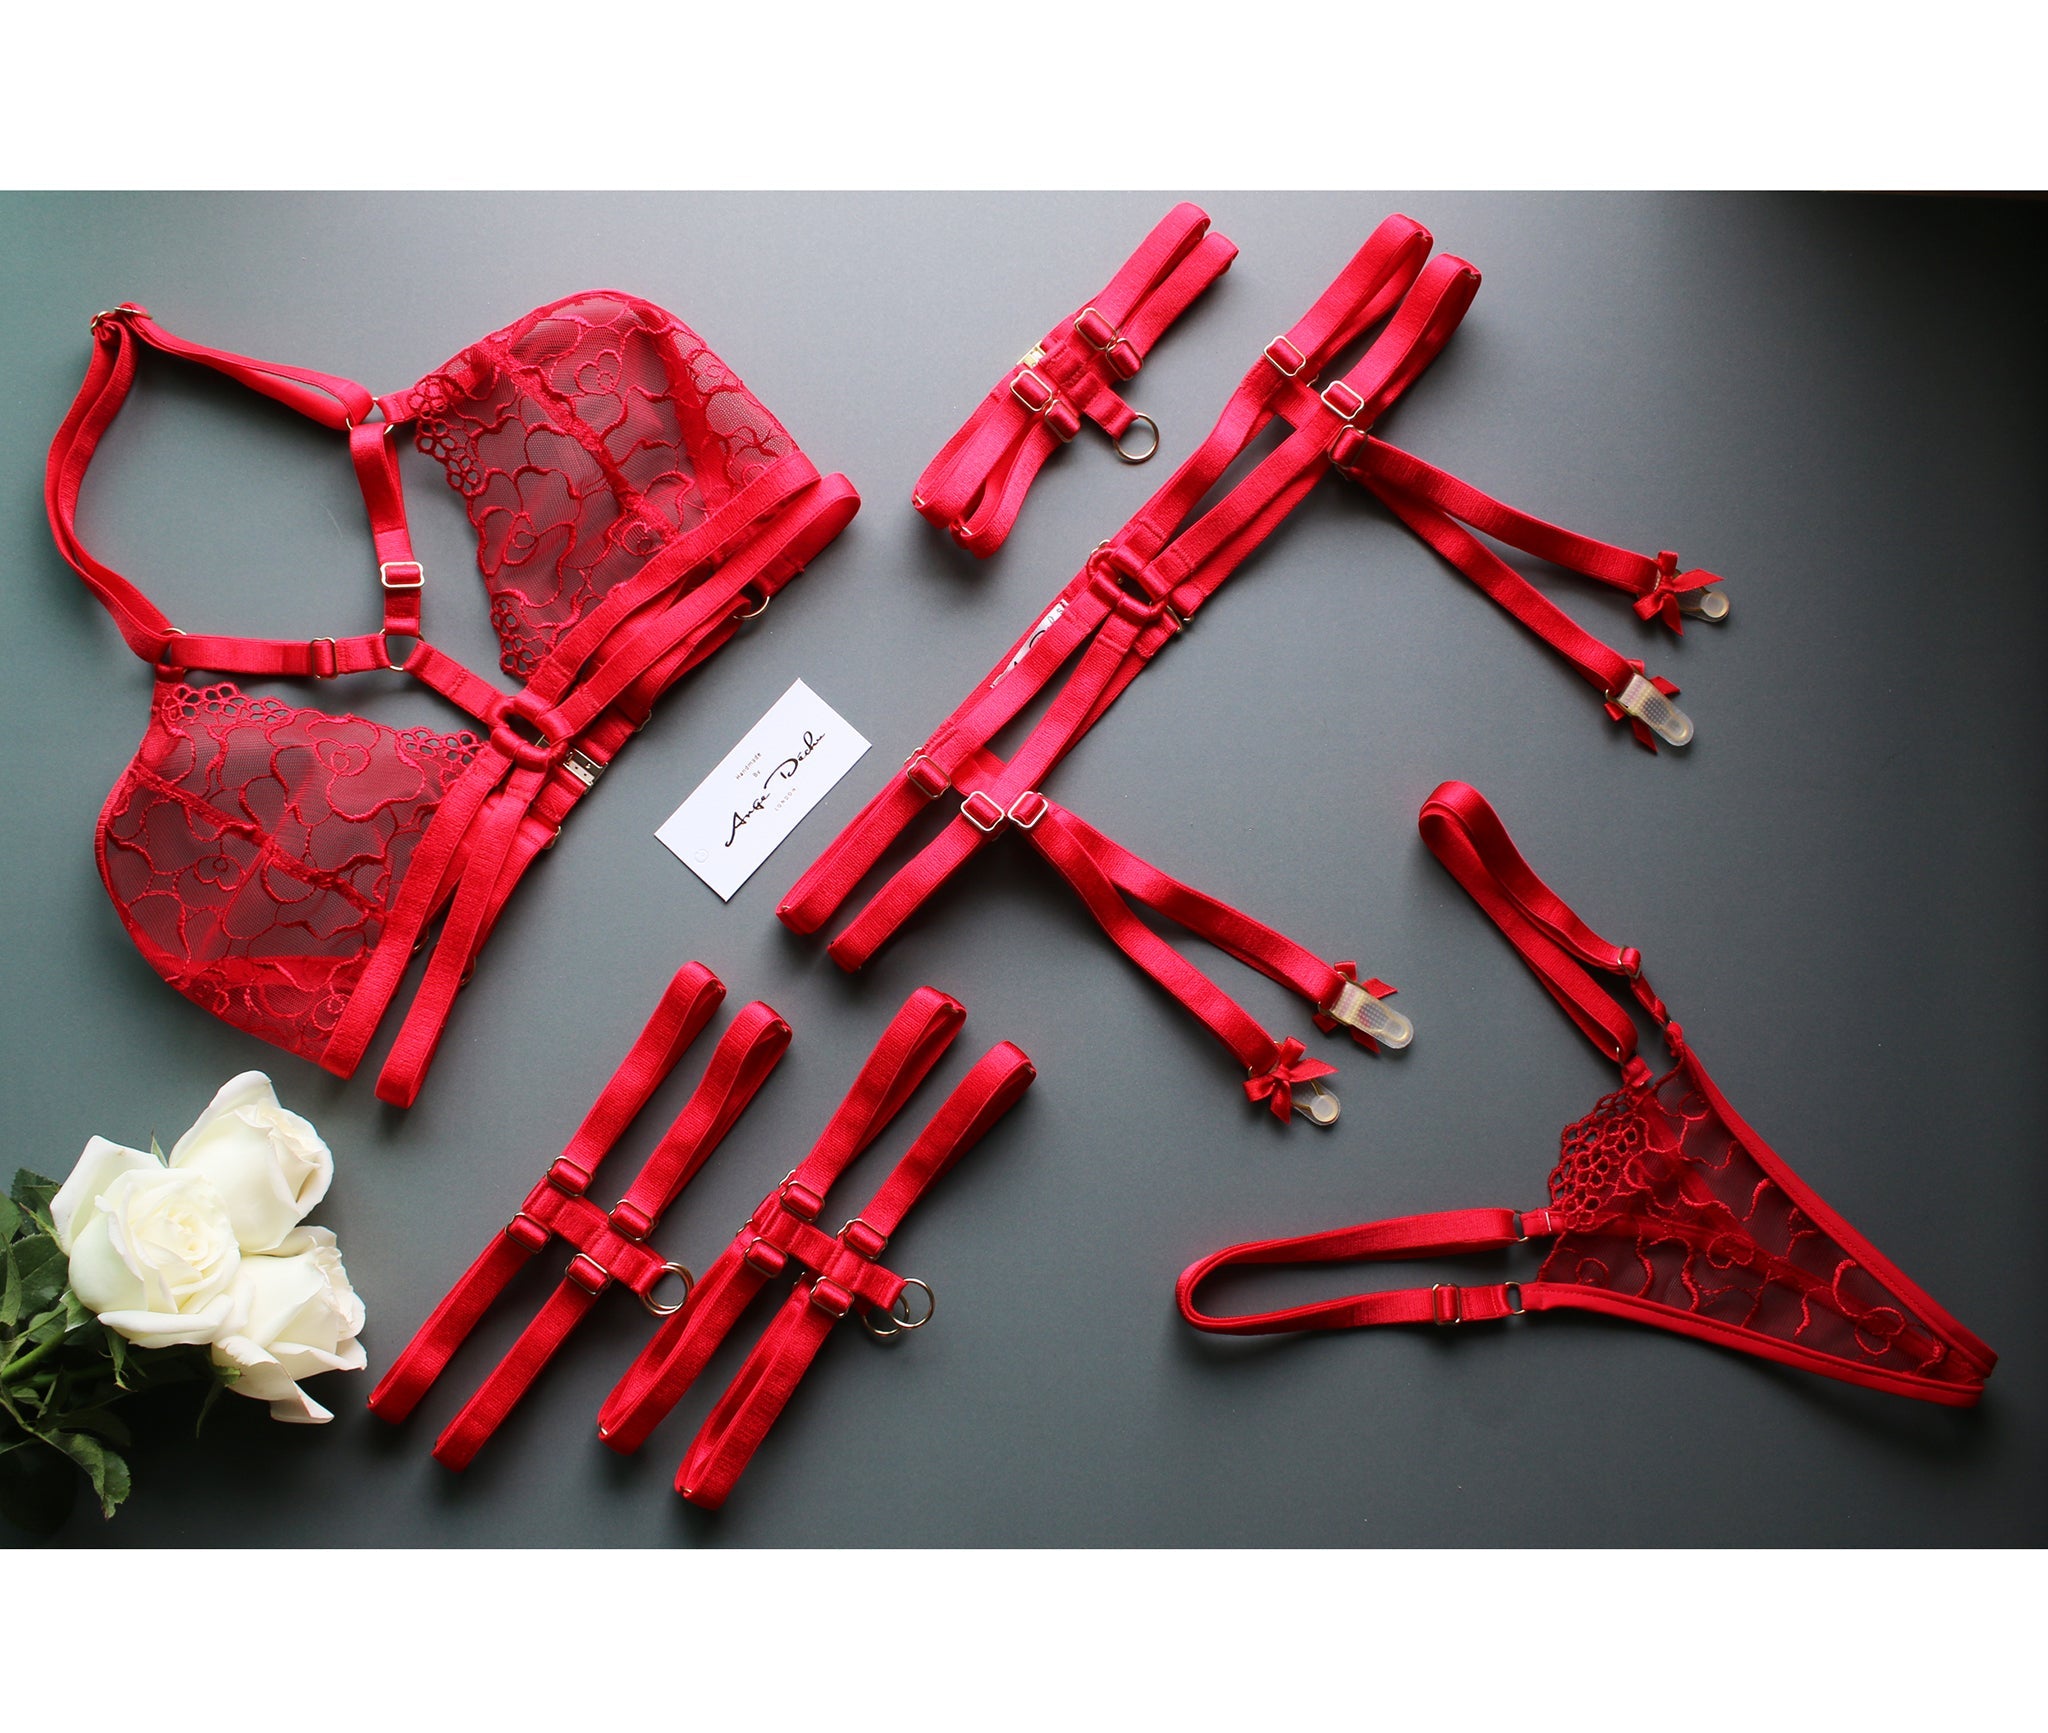 See through lingerie sexy red lace strappy body harness set with choker bra garter belt and garters see through panties g string - Ange Déchu